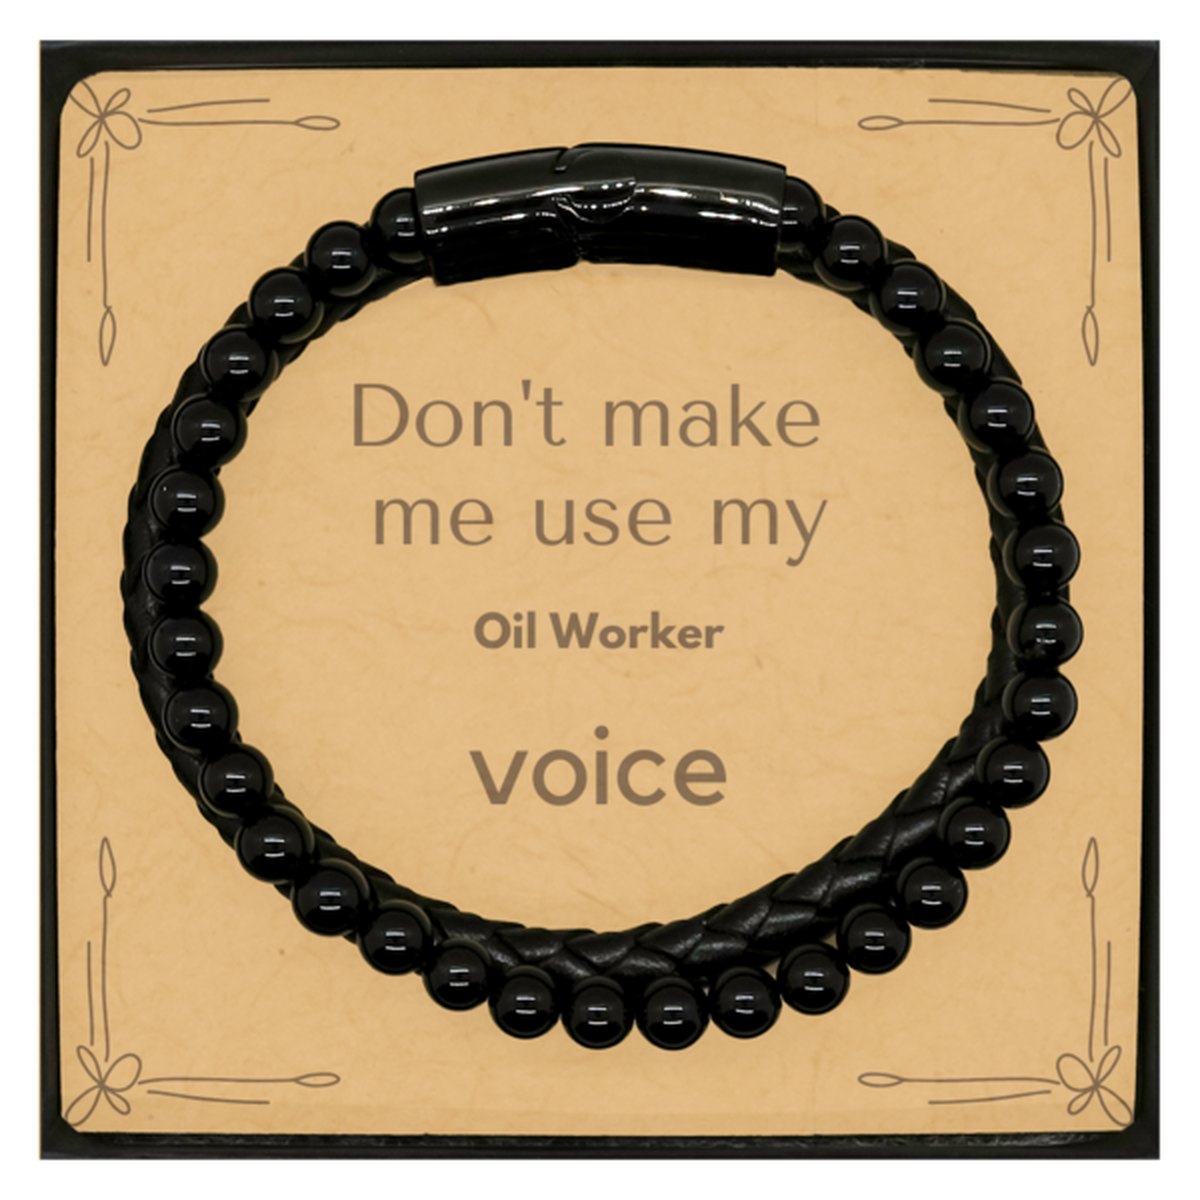 Don't make me use my Oil Worker voice, Sarcasm Oil Worker Card Gifts, Christmas Oil Worker Stone Leather Bracelets Birthday Unique Gifts For Oil Worker Coworkers, Men, Women, Colleague, Friends